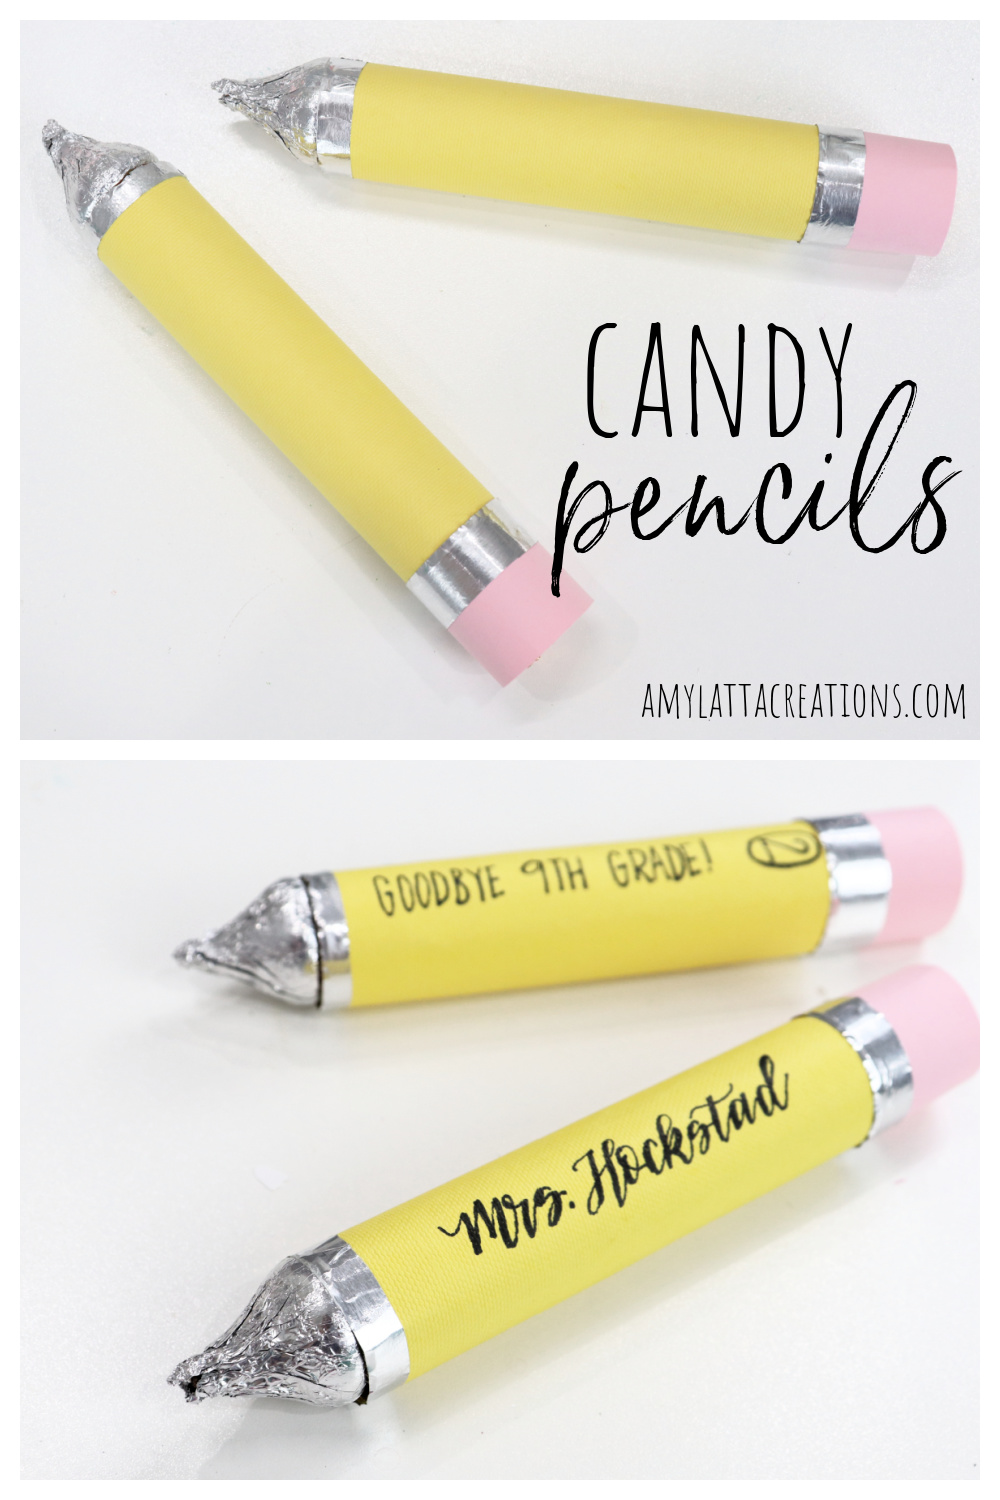 Image contains a collage of images of candy pencils designed for Pinterest.